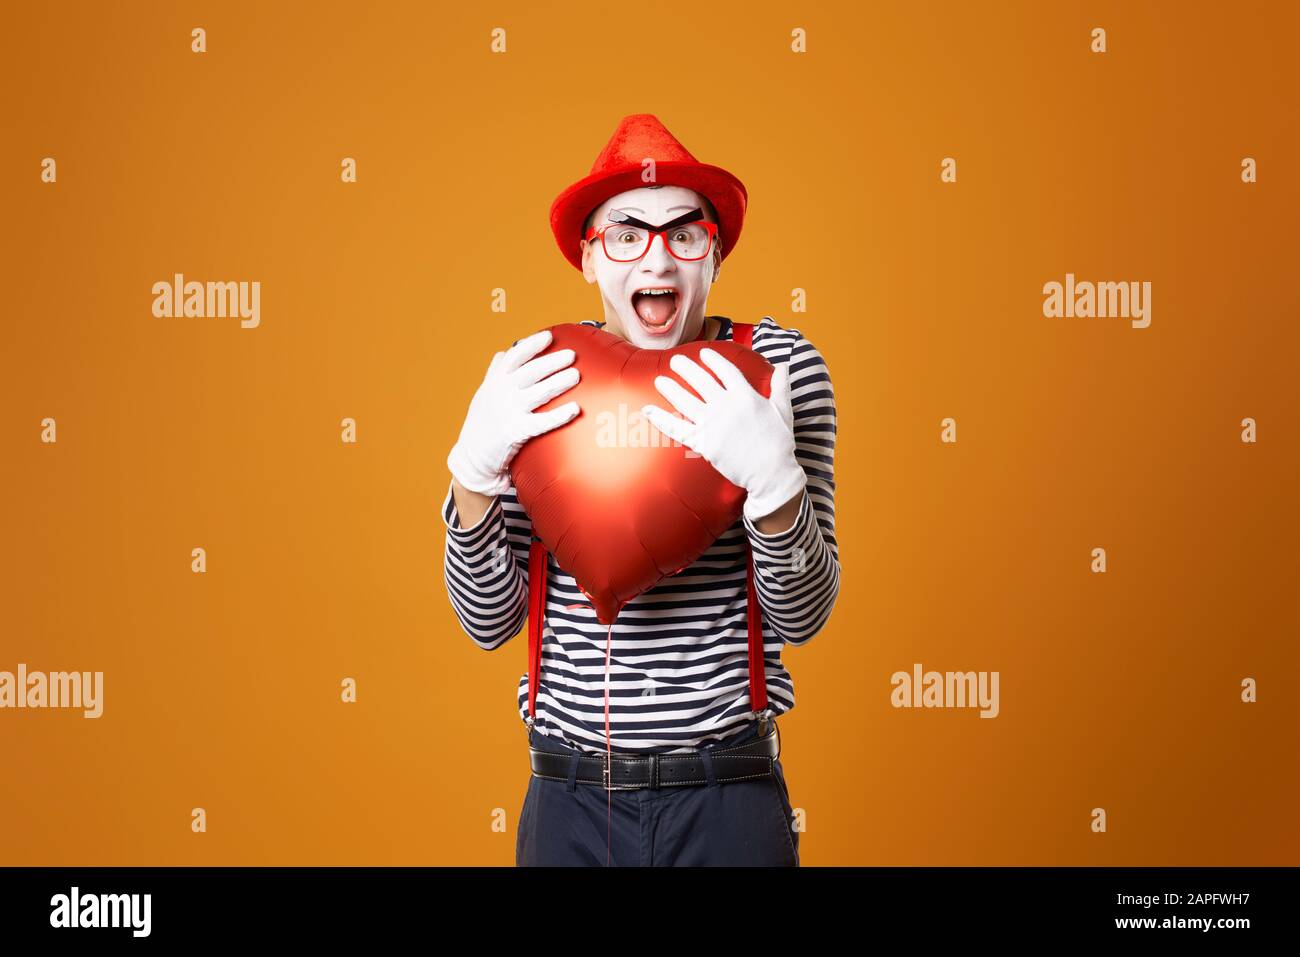 Sad clown mime in red hat and vest holds heart ball in his hands on empty orange background Stock Photo